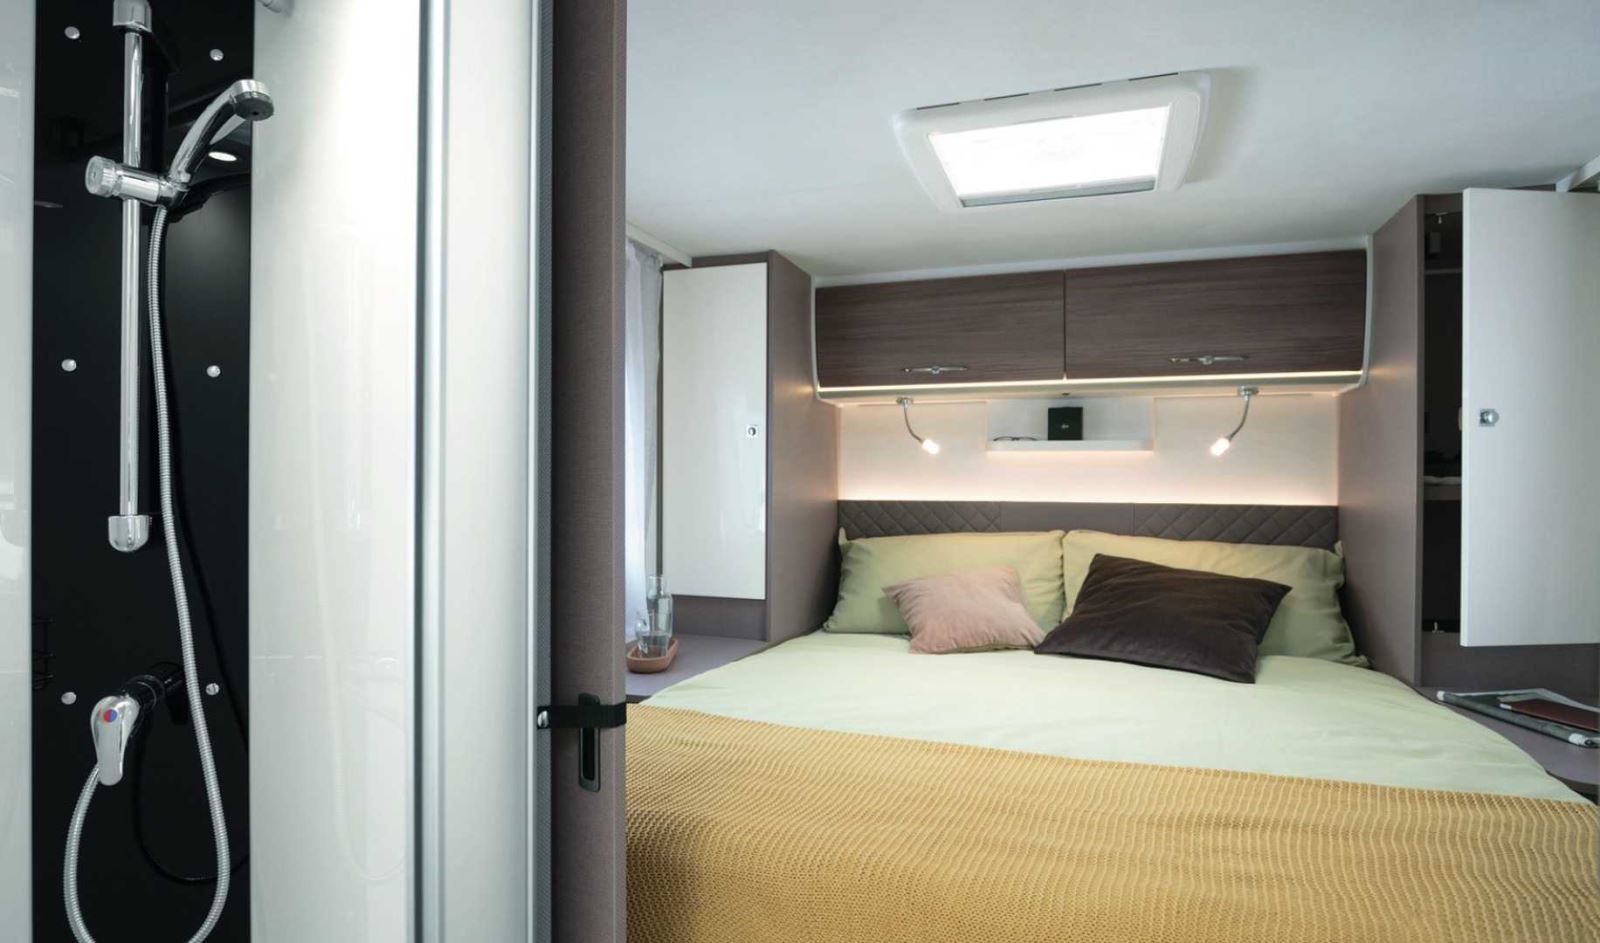 The bedroom inside the T 7400 QBC